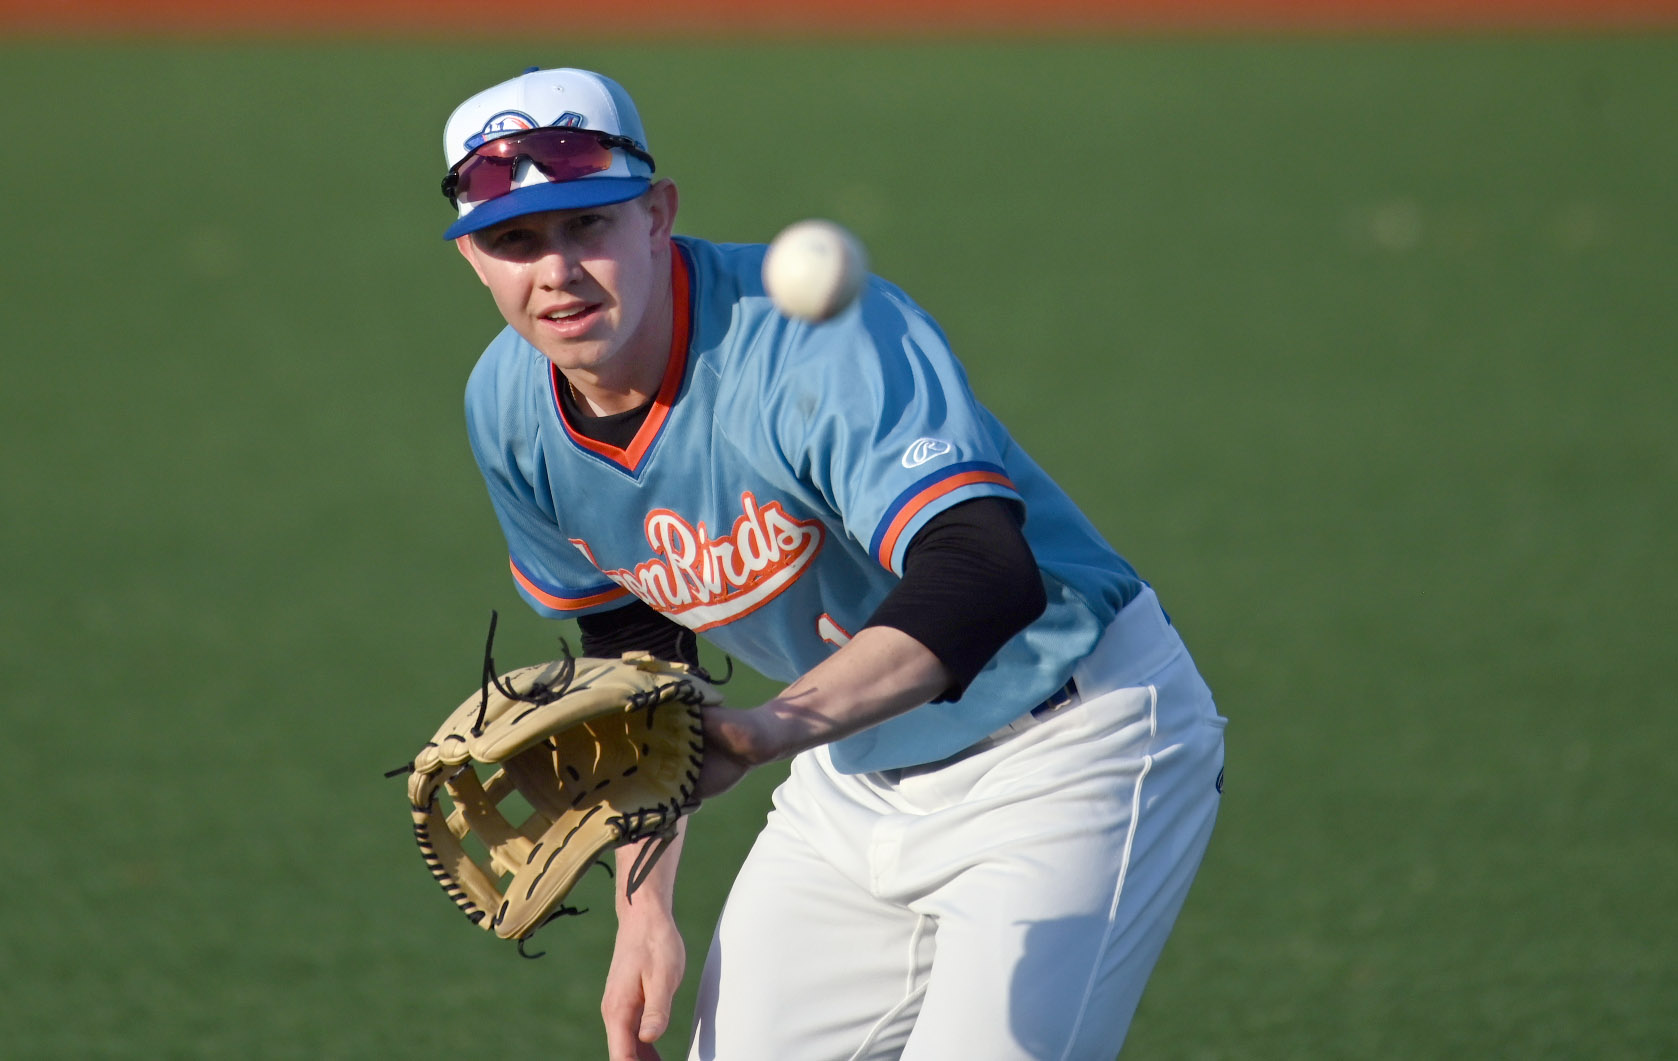 MLB Draft results: Orioles select Jackson Holliday with #1 pick